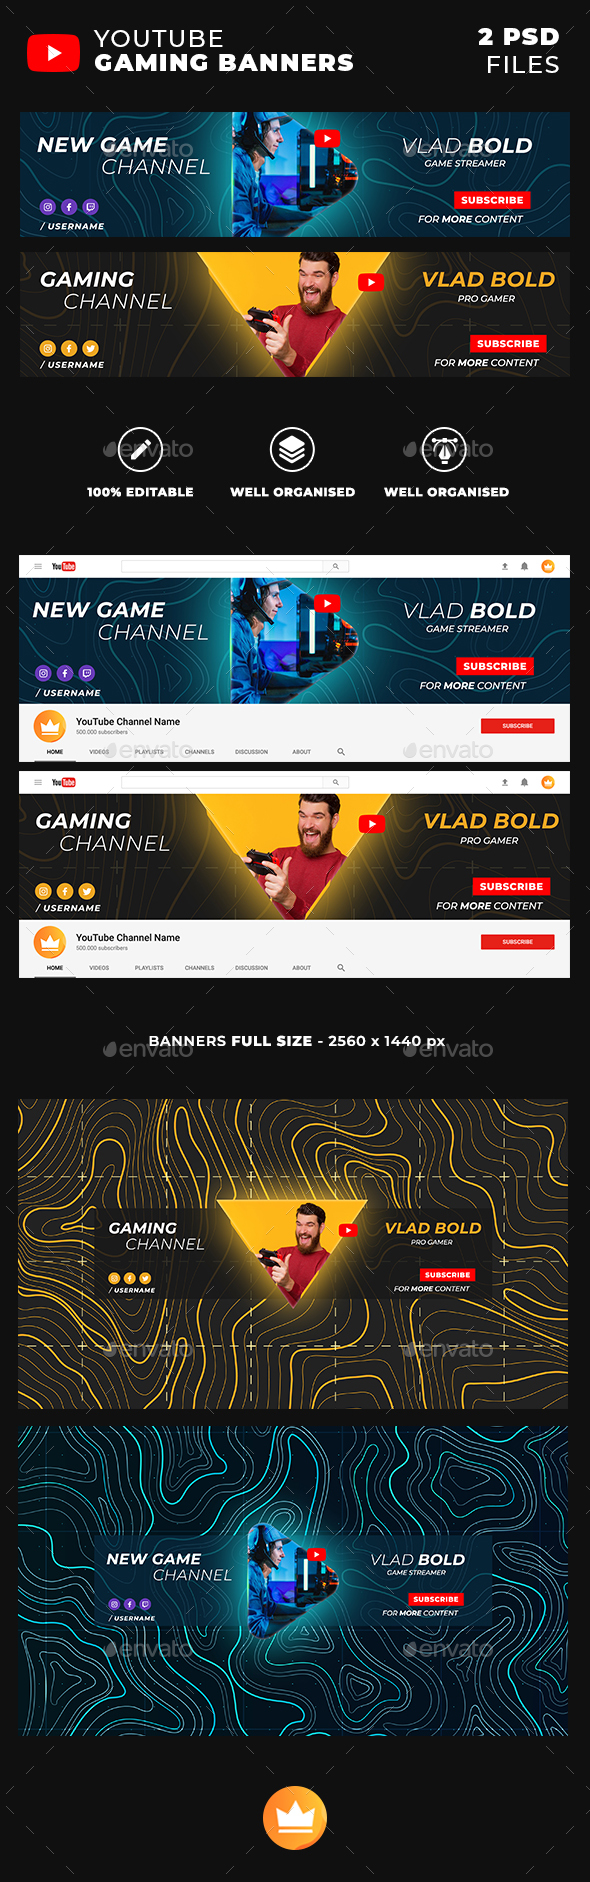 Youtube Banner Gaming Graphics Designs Templates